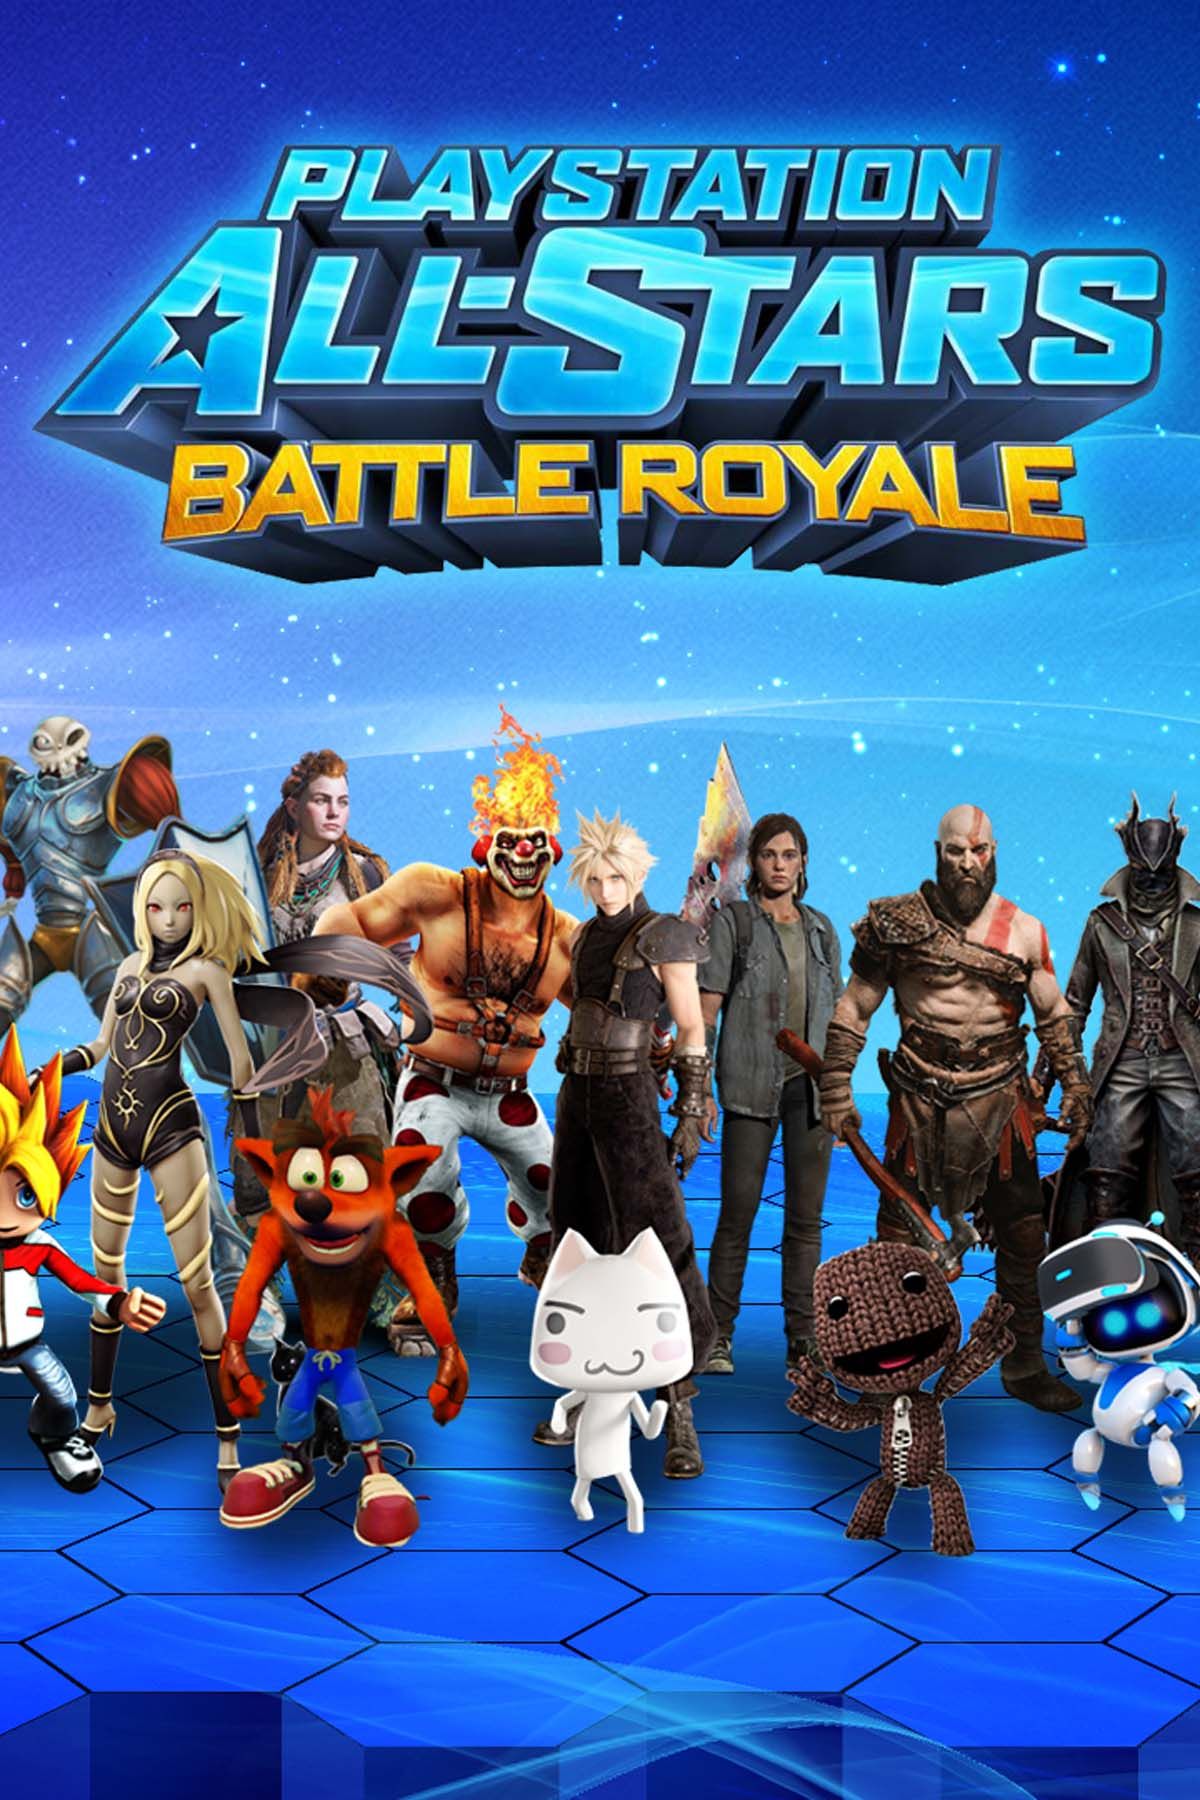 All Stars Battle Royale Game Rant